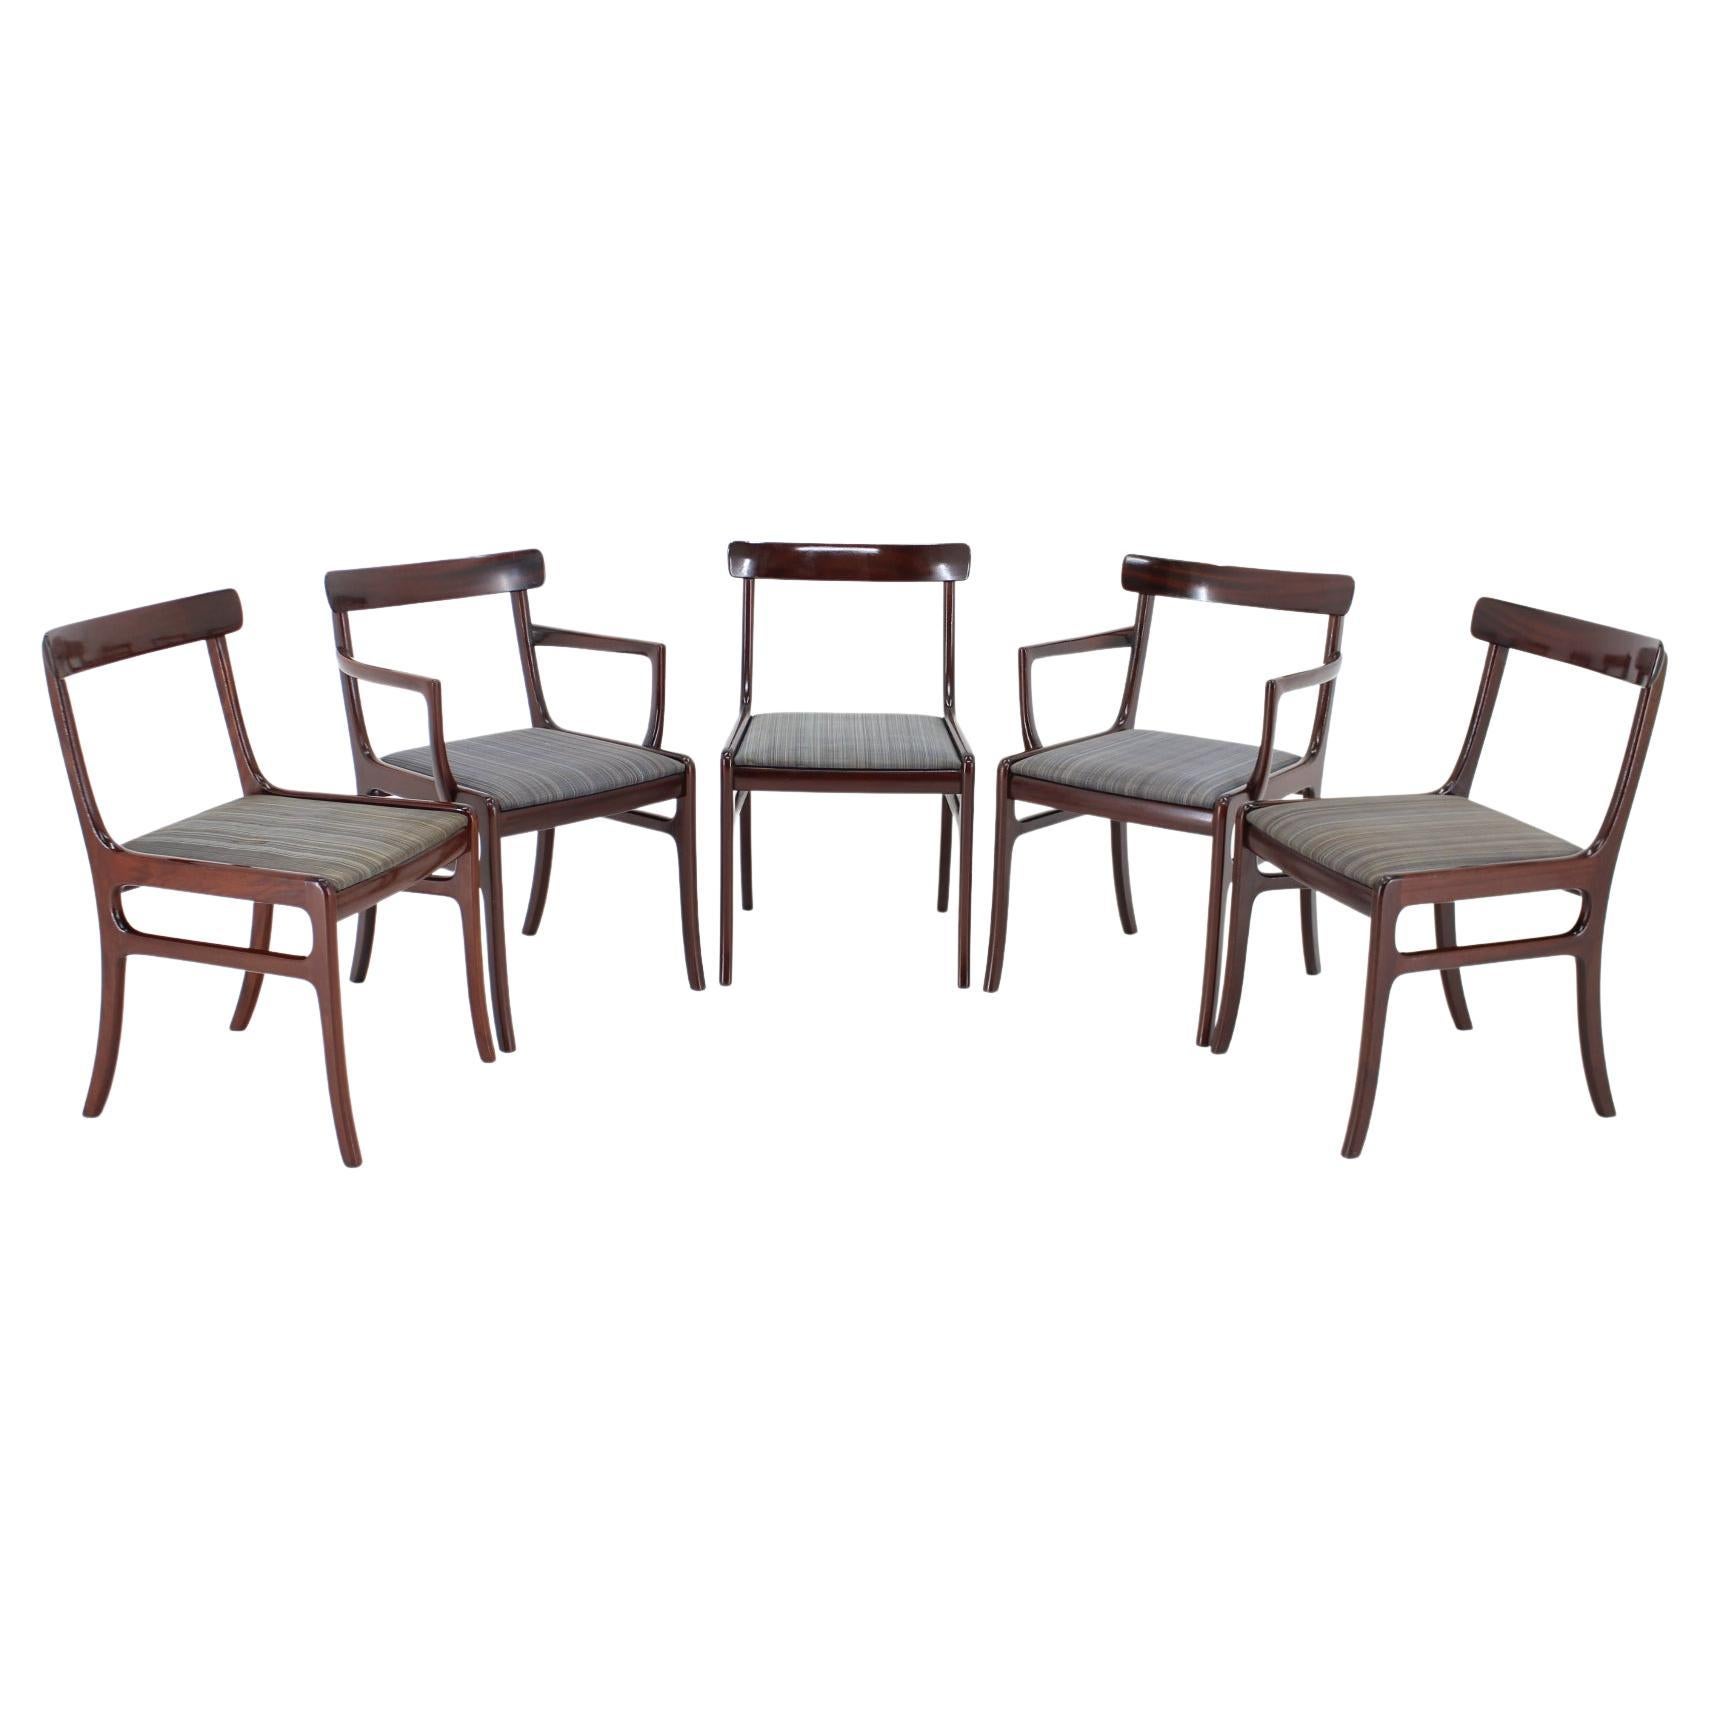 1950s Ole Wanscher Rungstedlund Chairs in Mahogany Denmark, Set of 5 For Sale